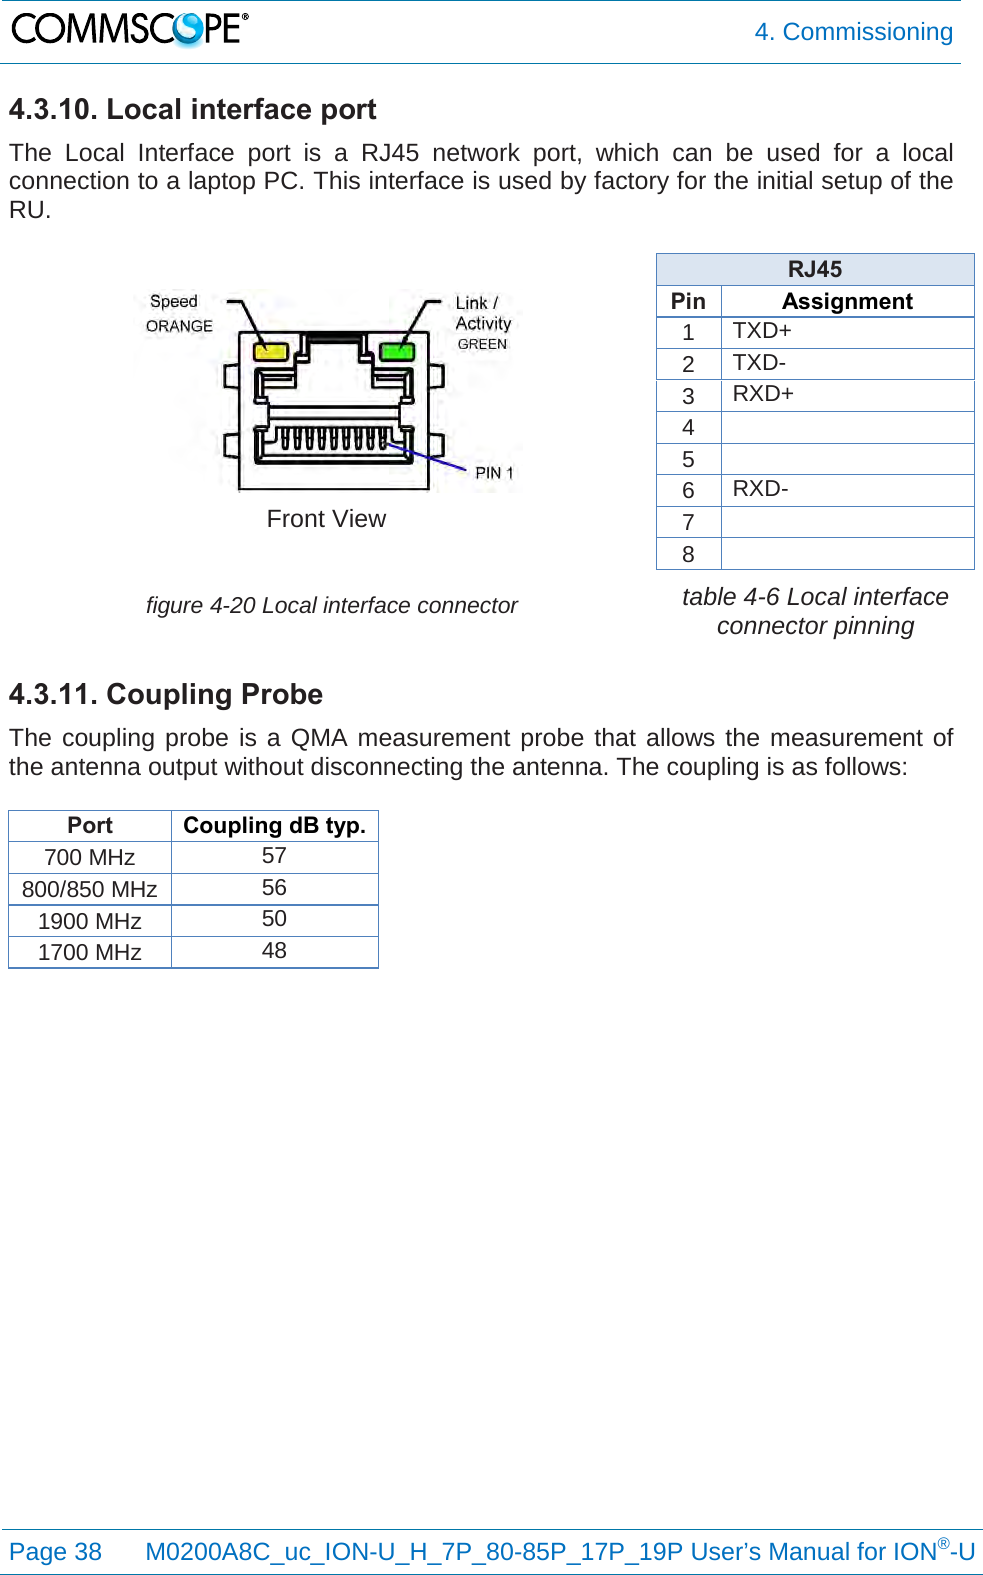  4. Commissioning  Page 38 M0200A8C_uc_ION-U_H_7P_80-85P_17P_19P User’s Manual for ION®-U  4.3.10. Local interface port The Local Interface port is a RJ45 network port, which can be used for a local connection to a laptop PC. This interface is used by factory for the initial setup of the RU.   Front View RJ45 Pin Assignment 1 TXD+ 2 TXD- 3 RXD+ 4  5  6 RXD- 7  8   figure 4-20 Local interface connector table 4-6 Local interface connector pinning 4.3.11. Coupling Probe The coupling probe is a QMA measurement probe that allows the measurement of the antenna output without disconnecting the antenna. The coupling is as follows:  Port Coupling dB typ. 700 MHz 57 800/850 MHz 56 1900 MHz 50 1700 MHz 48  